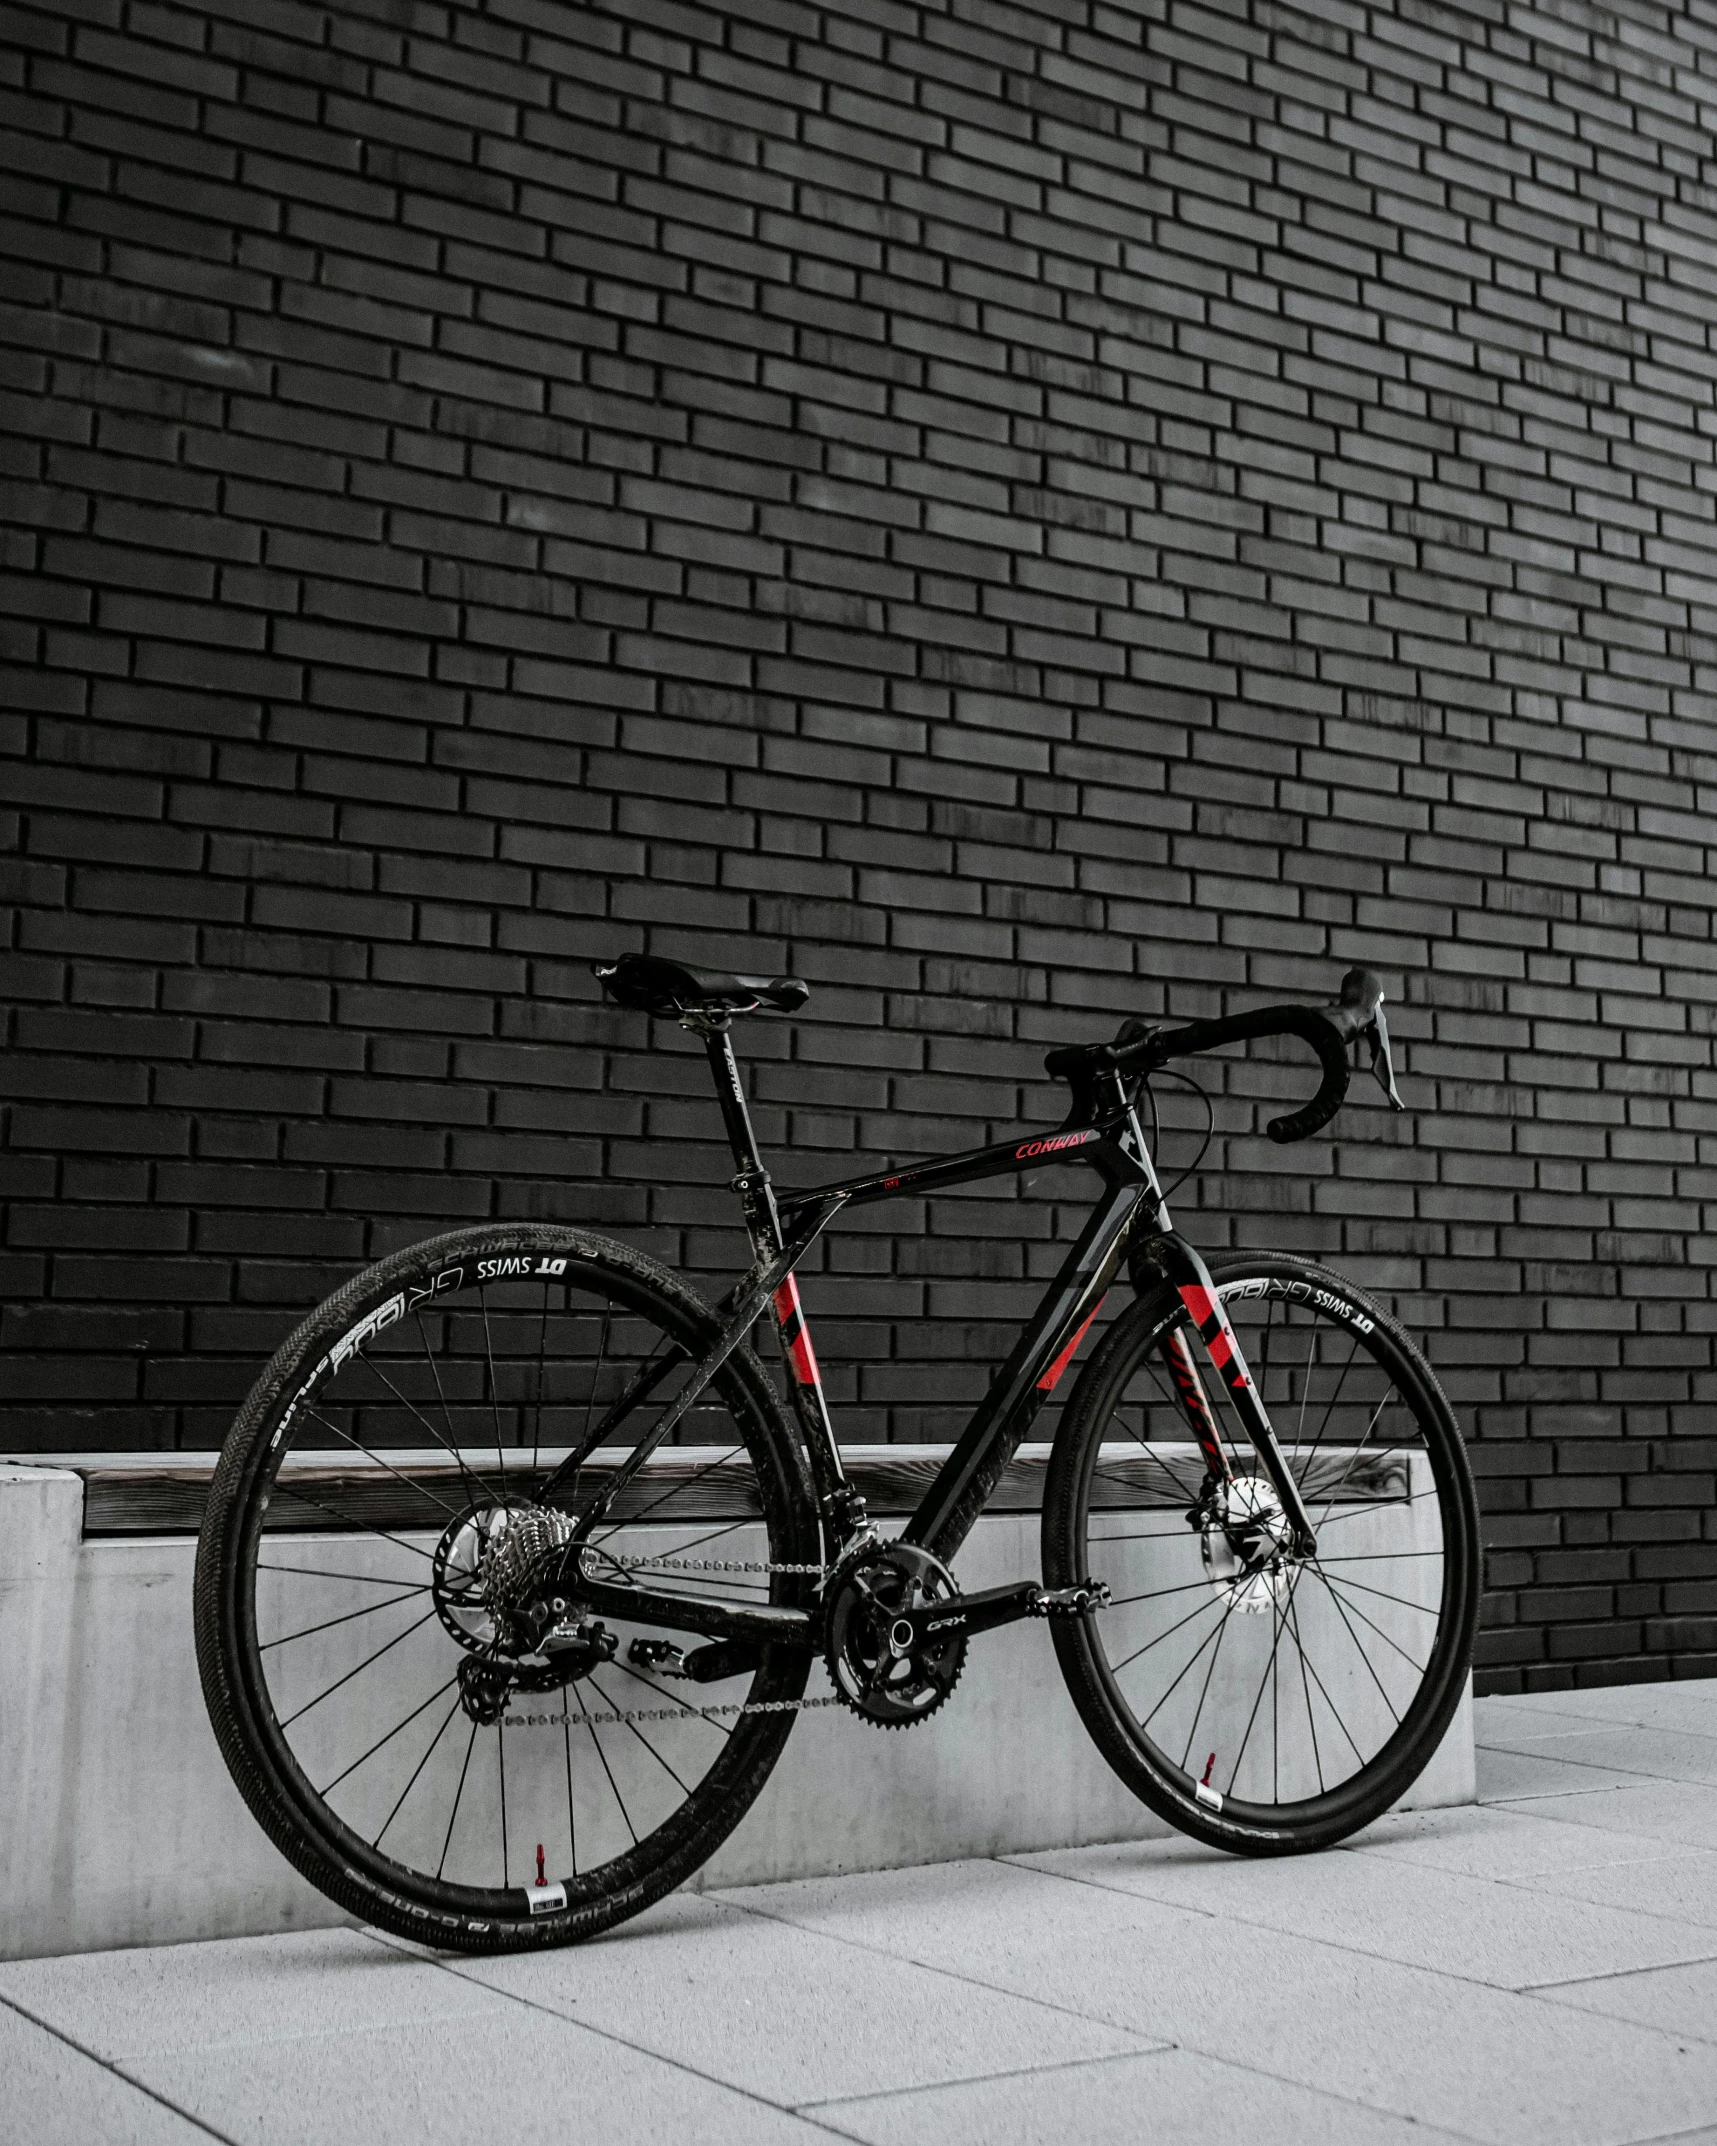 a bicycle leaning on a curb in front of a brick building